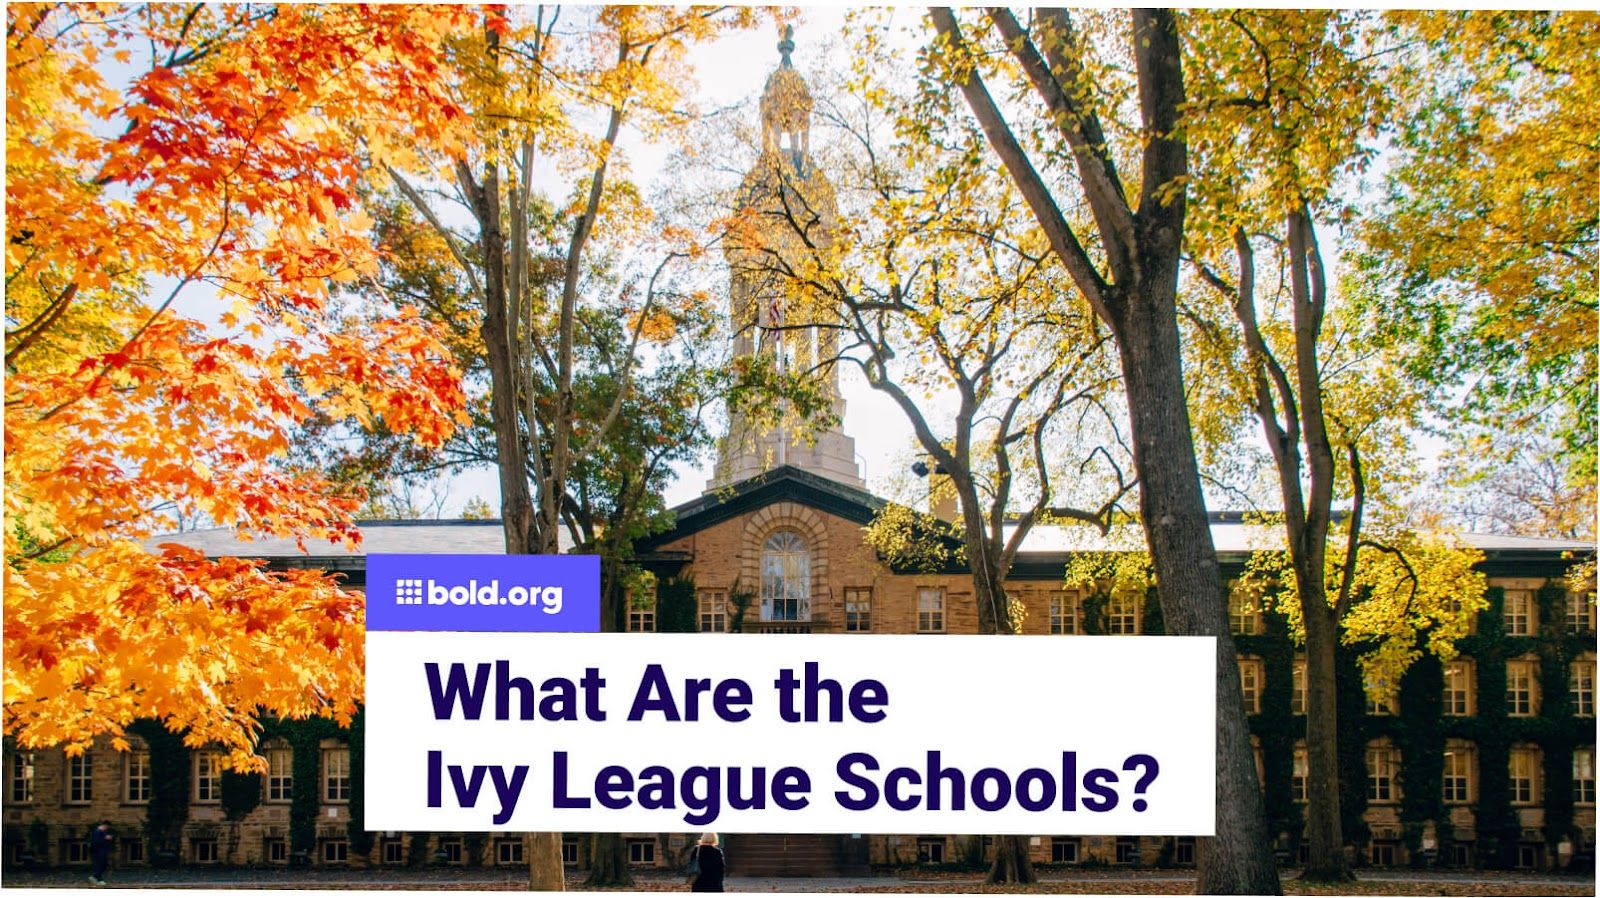 What Are the Ivy League Schools? | Bold.org